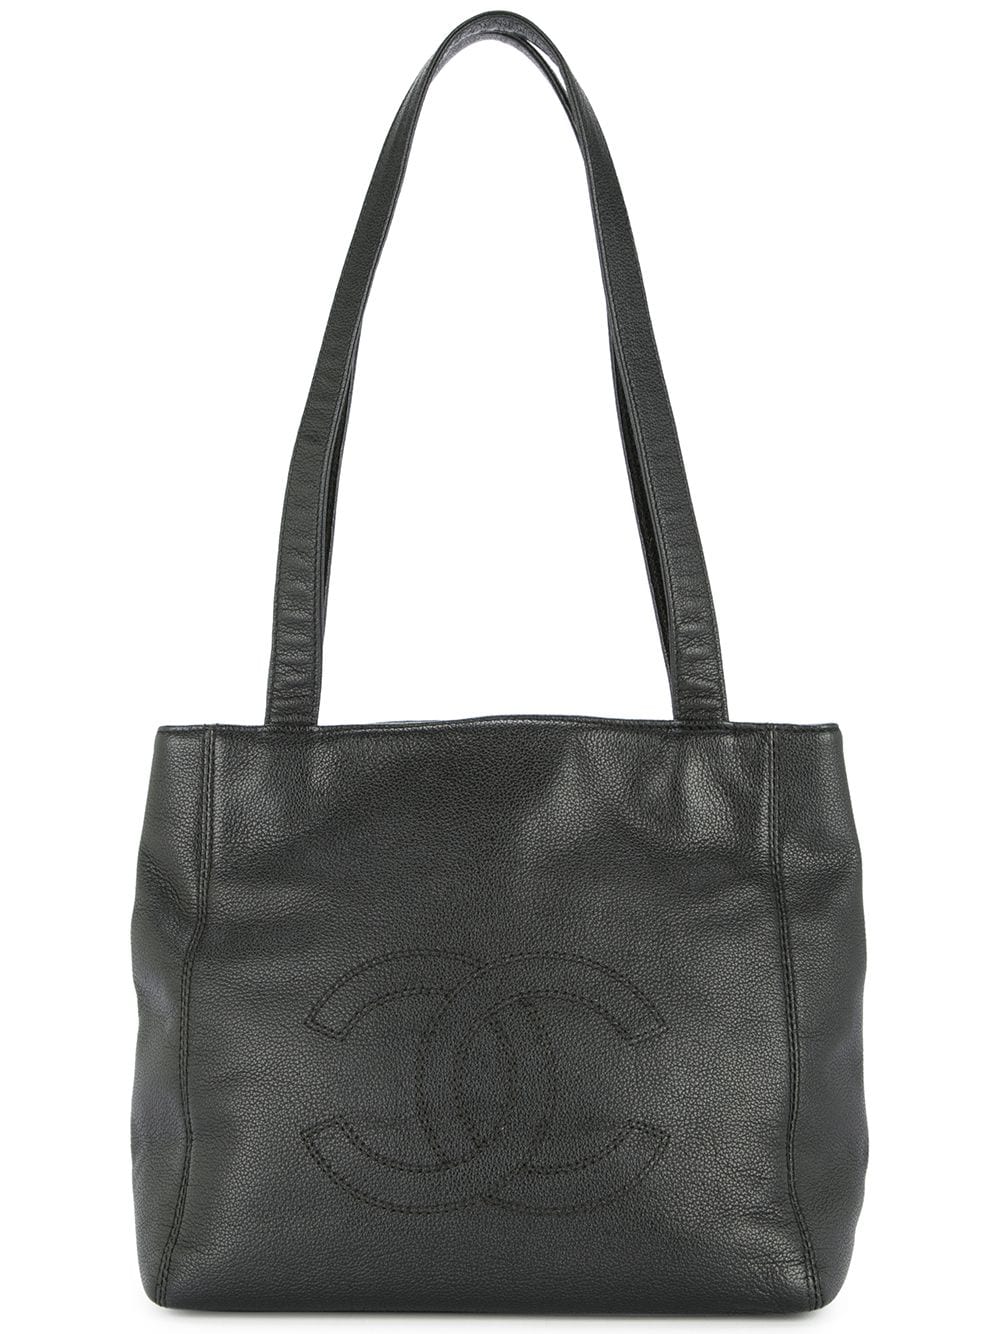 CHANEL Pre-Owned 1997-1999 Chanel CC Shoulder Tote Bag - Farfetch